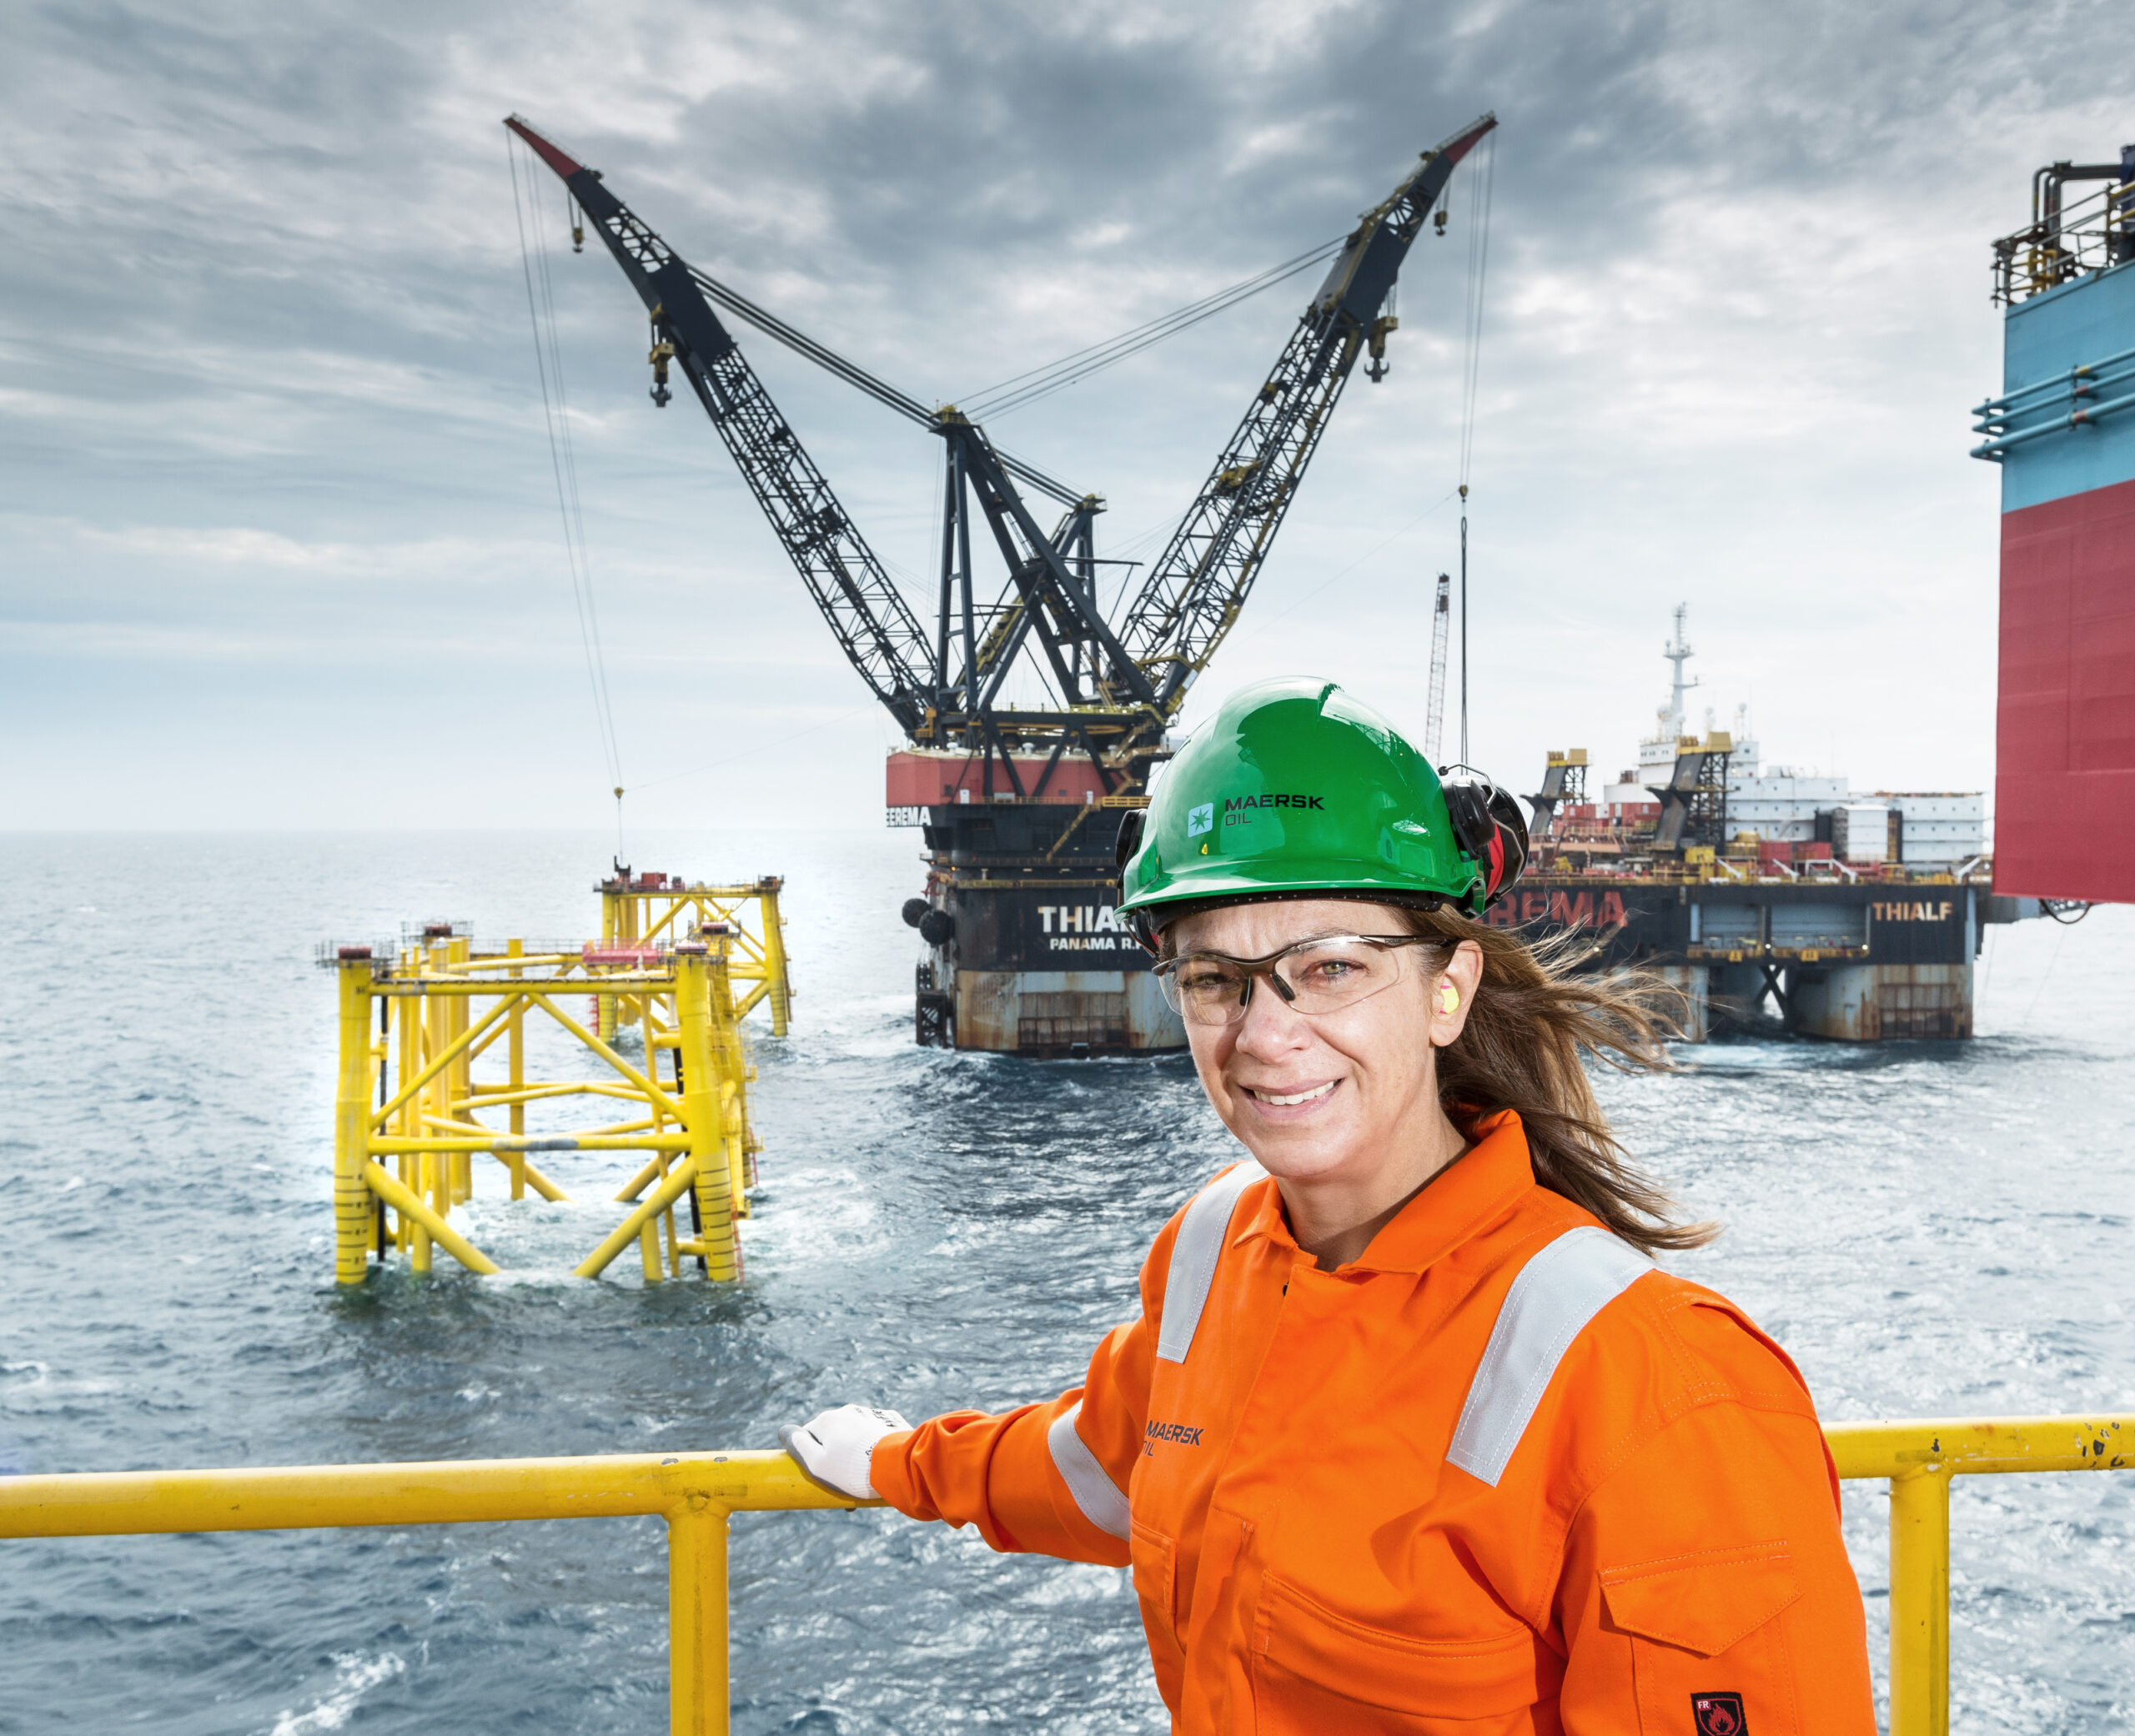 oil and gas jobs